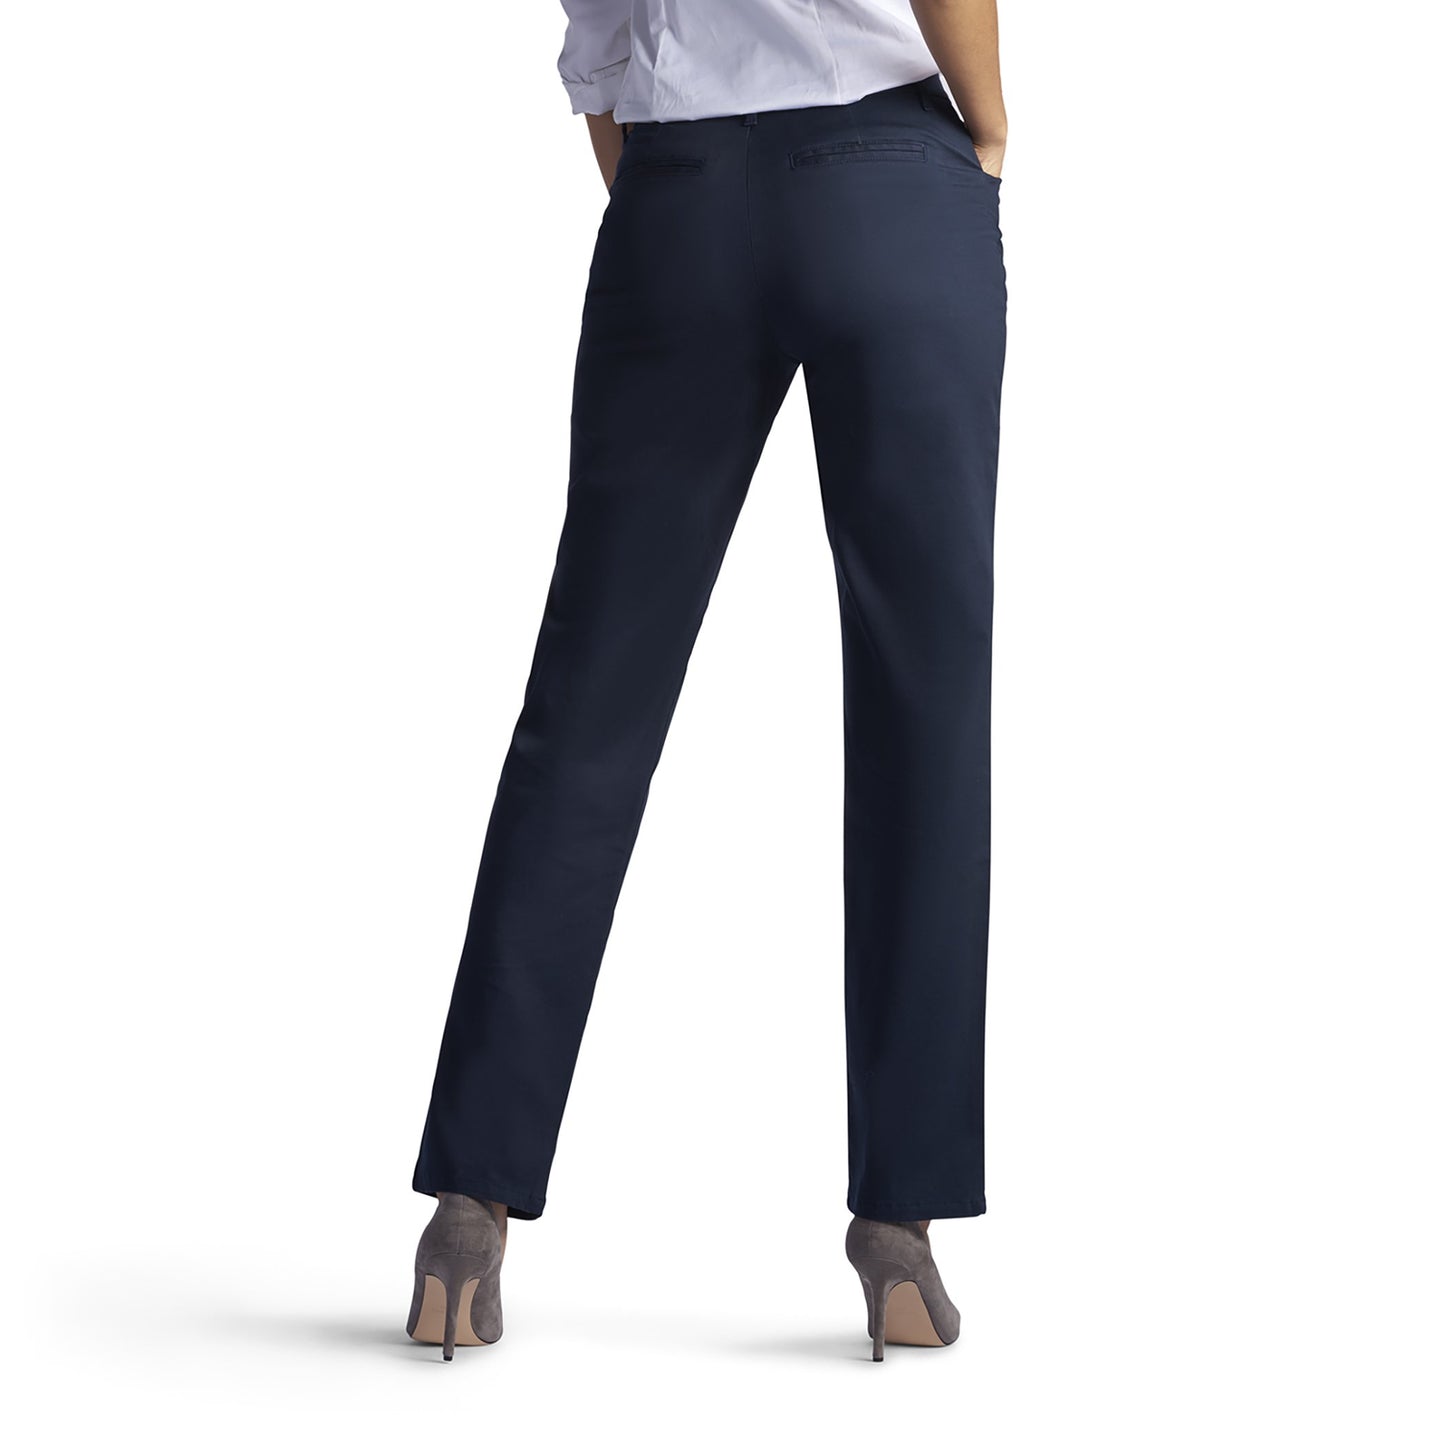 Lee Women's Relaxed Fit All Day Straight Leg Pant Imperial Blue 8 Long